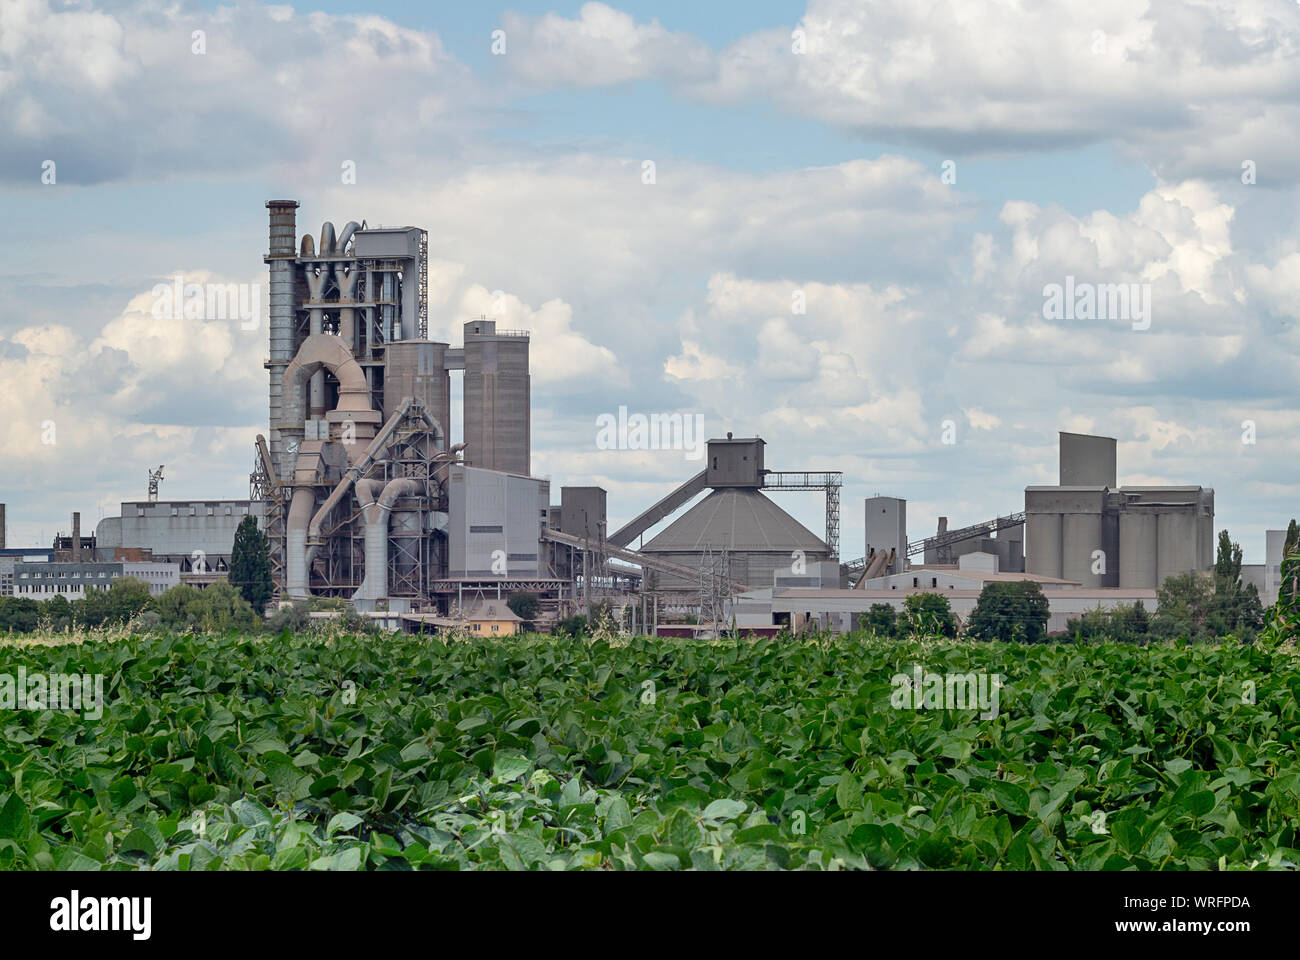 Buildings and production facilities of a cement plant Stock Photo